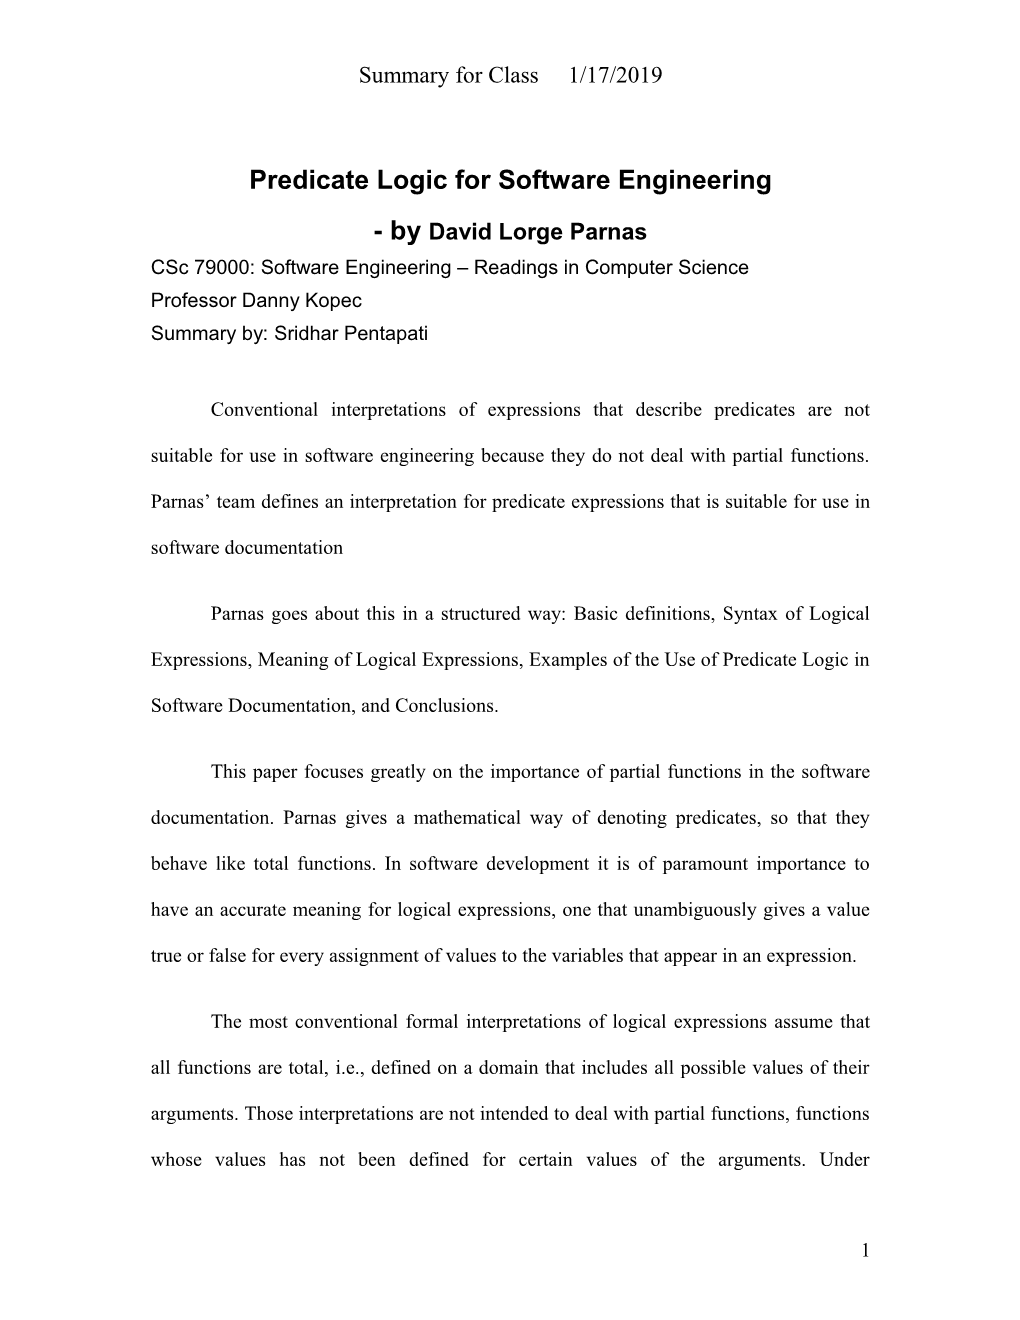 Predicate Logic for Software Engineering